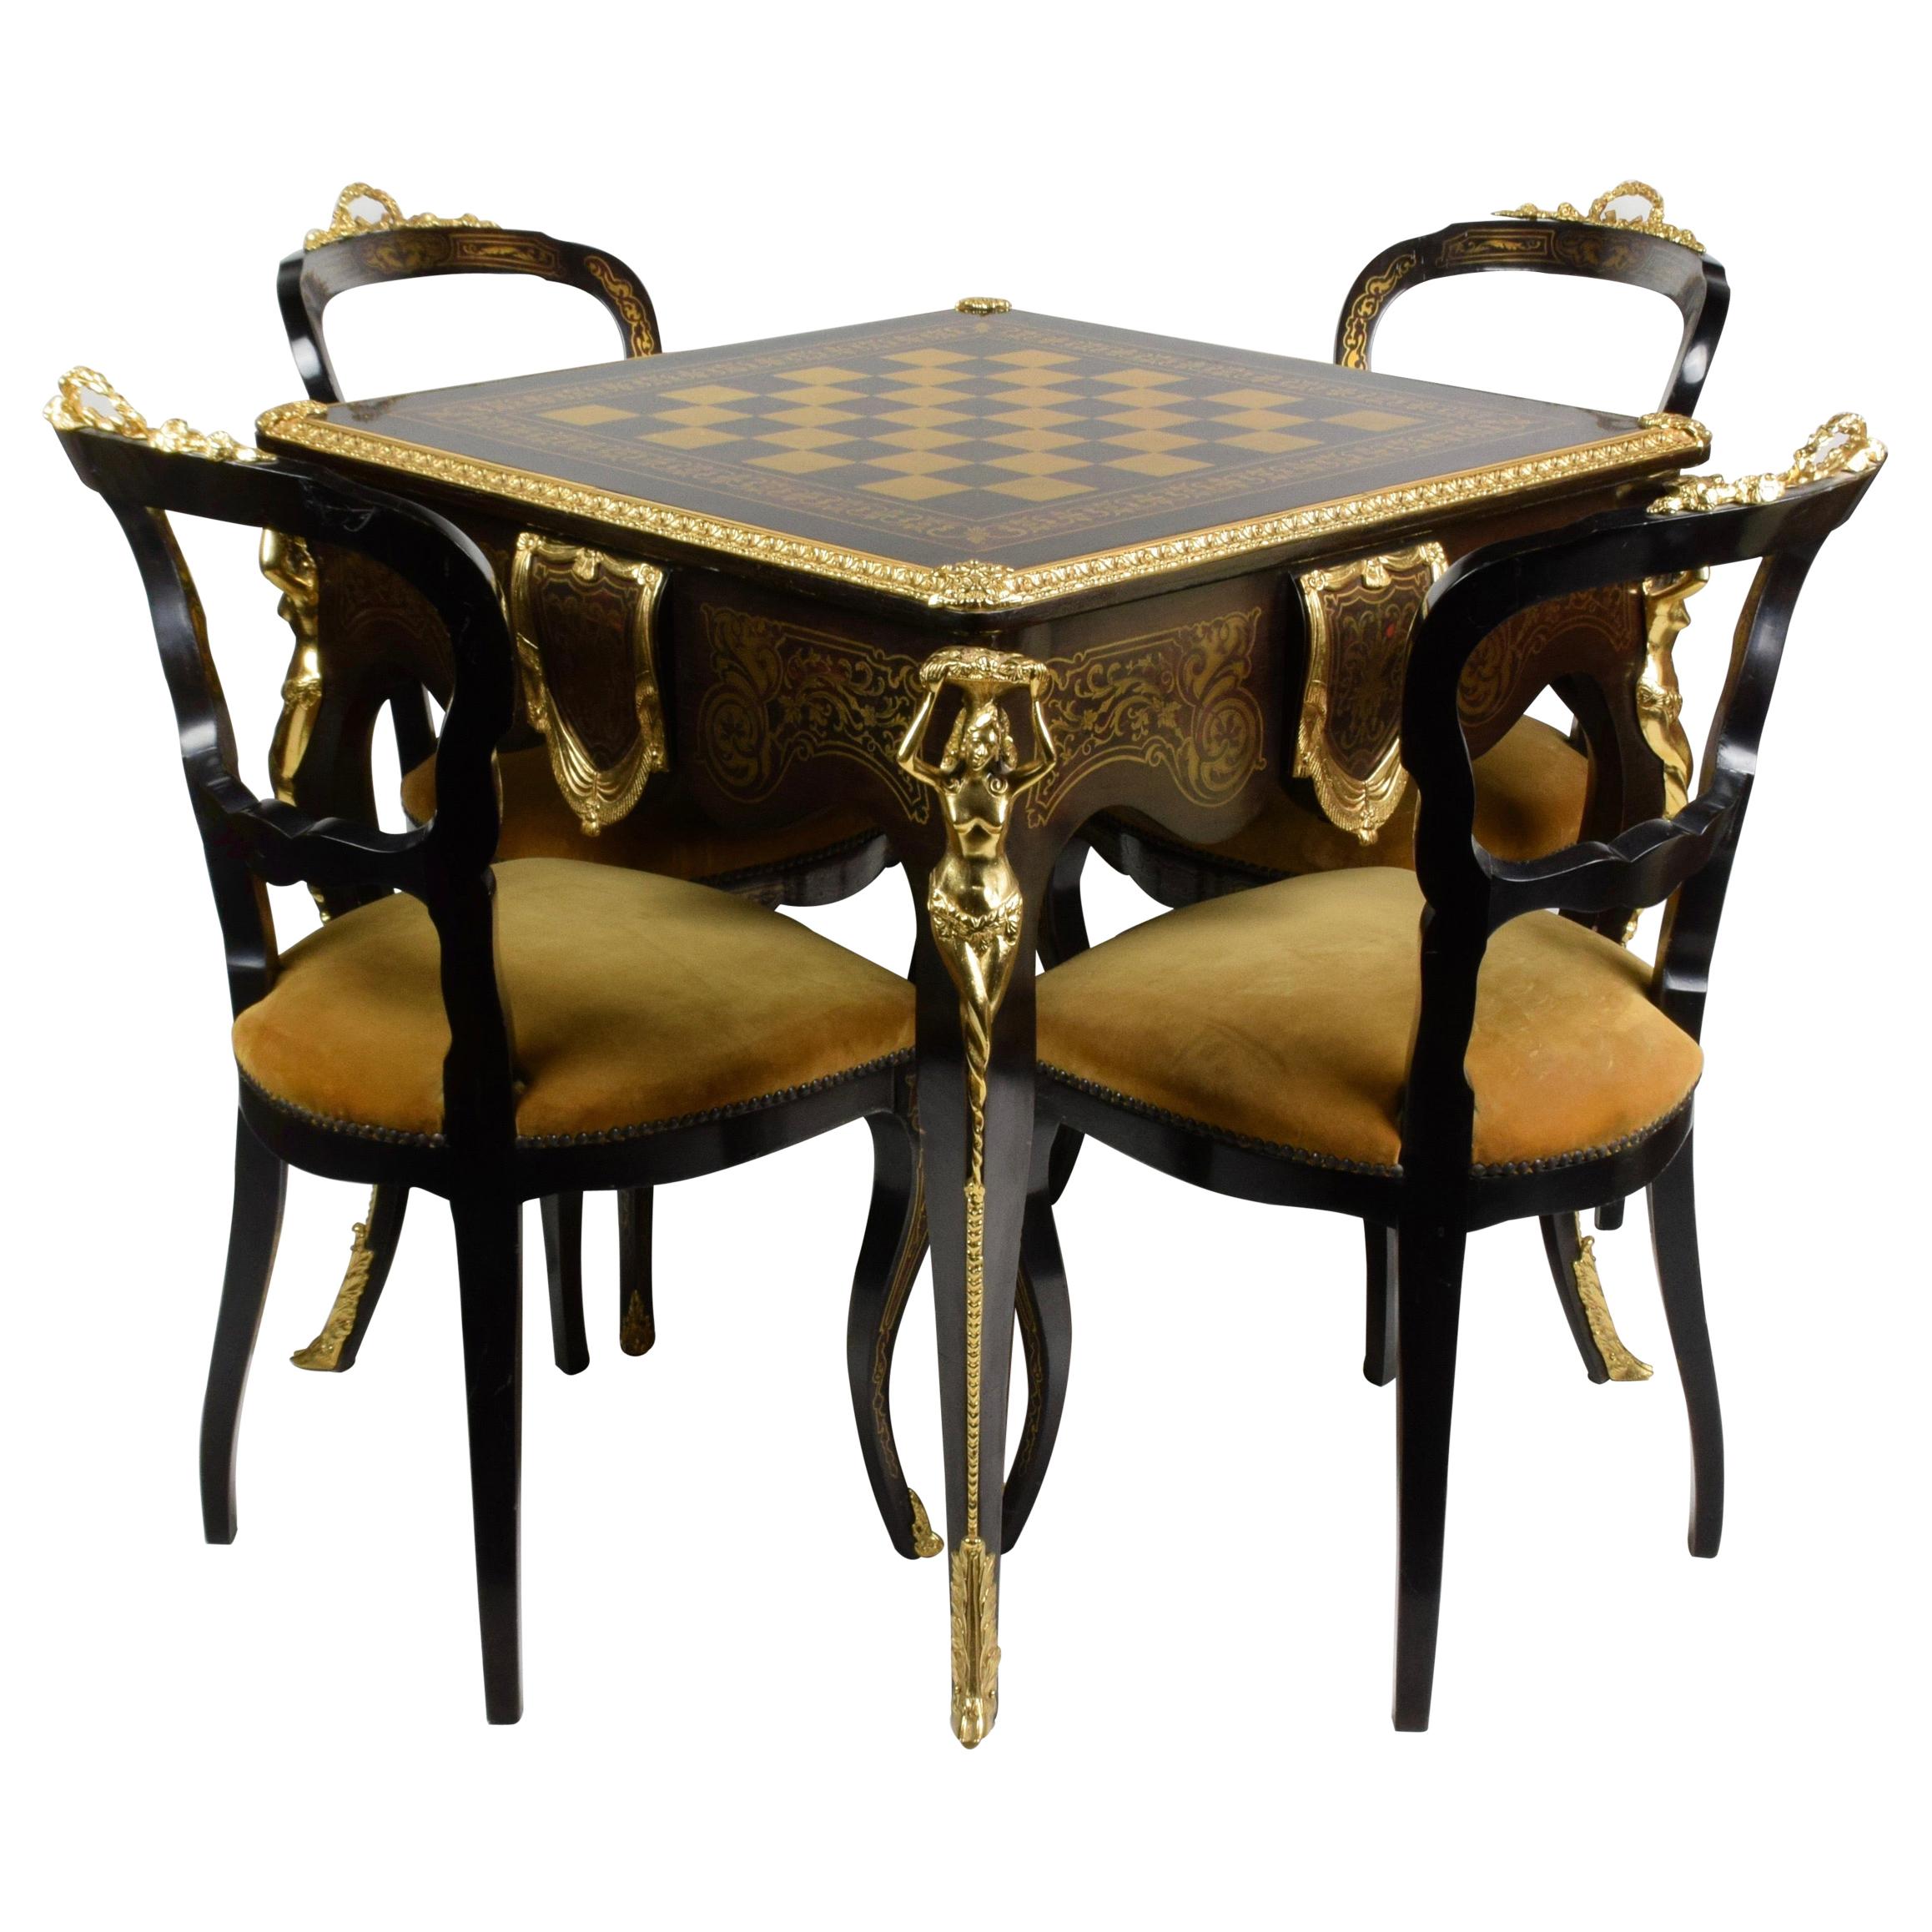 Italian Artisan Reproduction of the 1960s Game Table with 4 Chairs Wood Brass